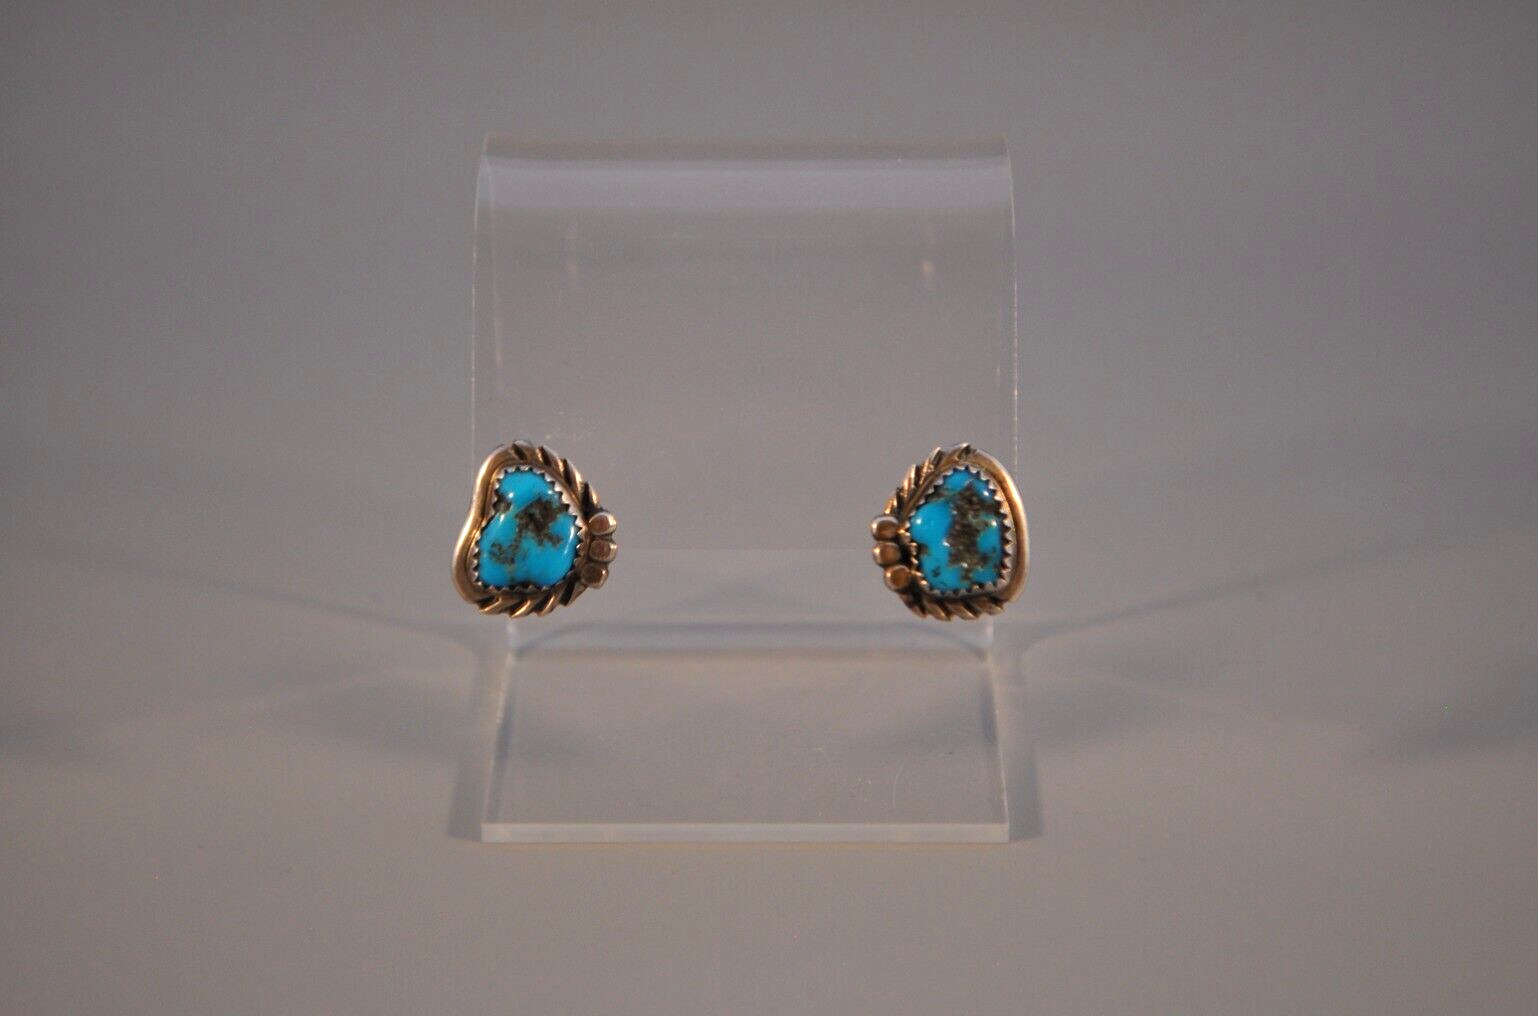 Old Pawn Navajo Sterling Silver Earrings - Turquoise